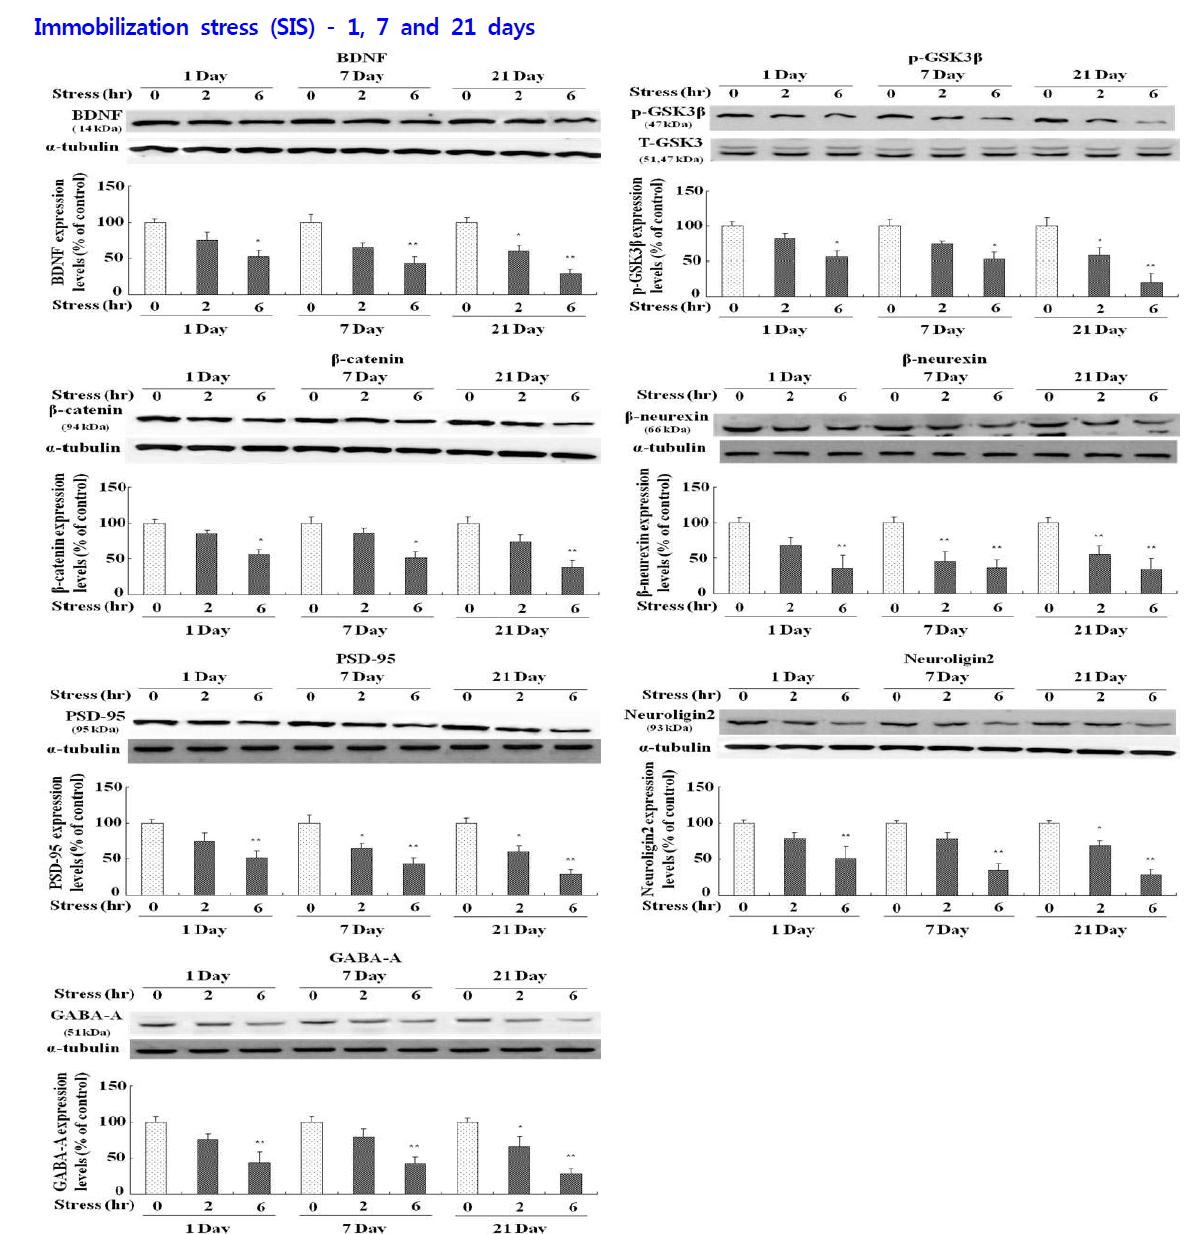 Effects of immobilization stress (SIS) on the levels of BDNF, phospho-ser9-GSK-3β, β-catenin, β-neurexin, PSD-95, neurologin 2 and GABA-A expression in hippocampus of rats